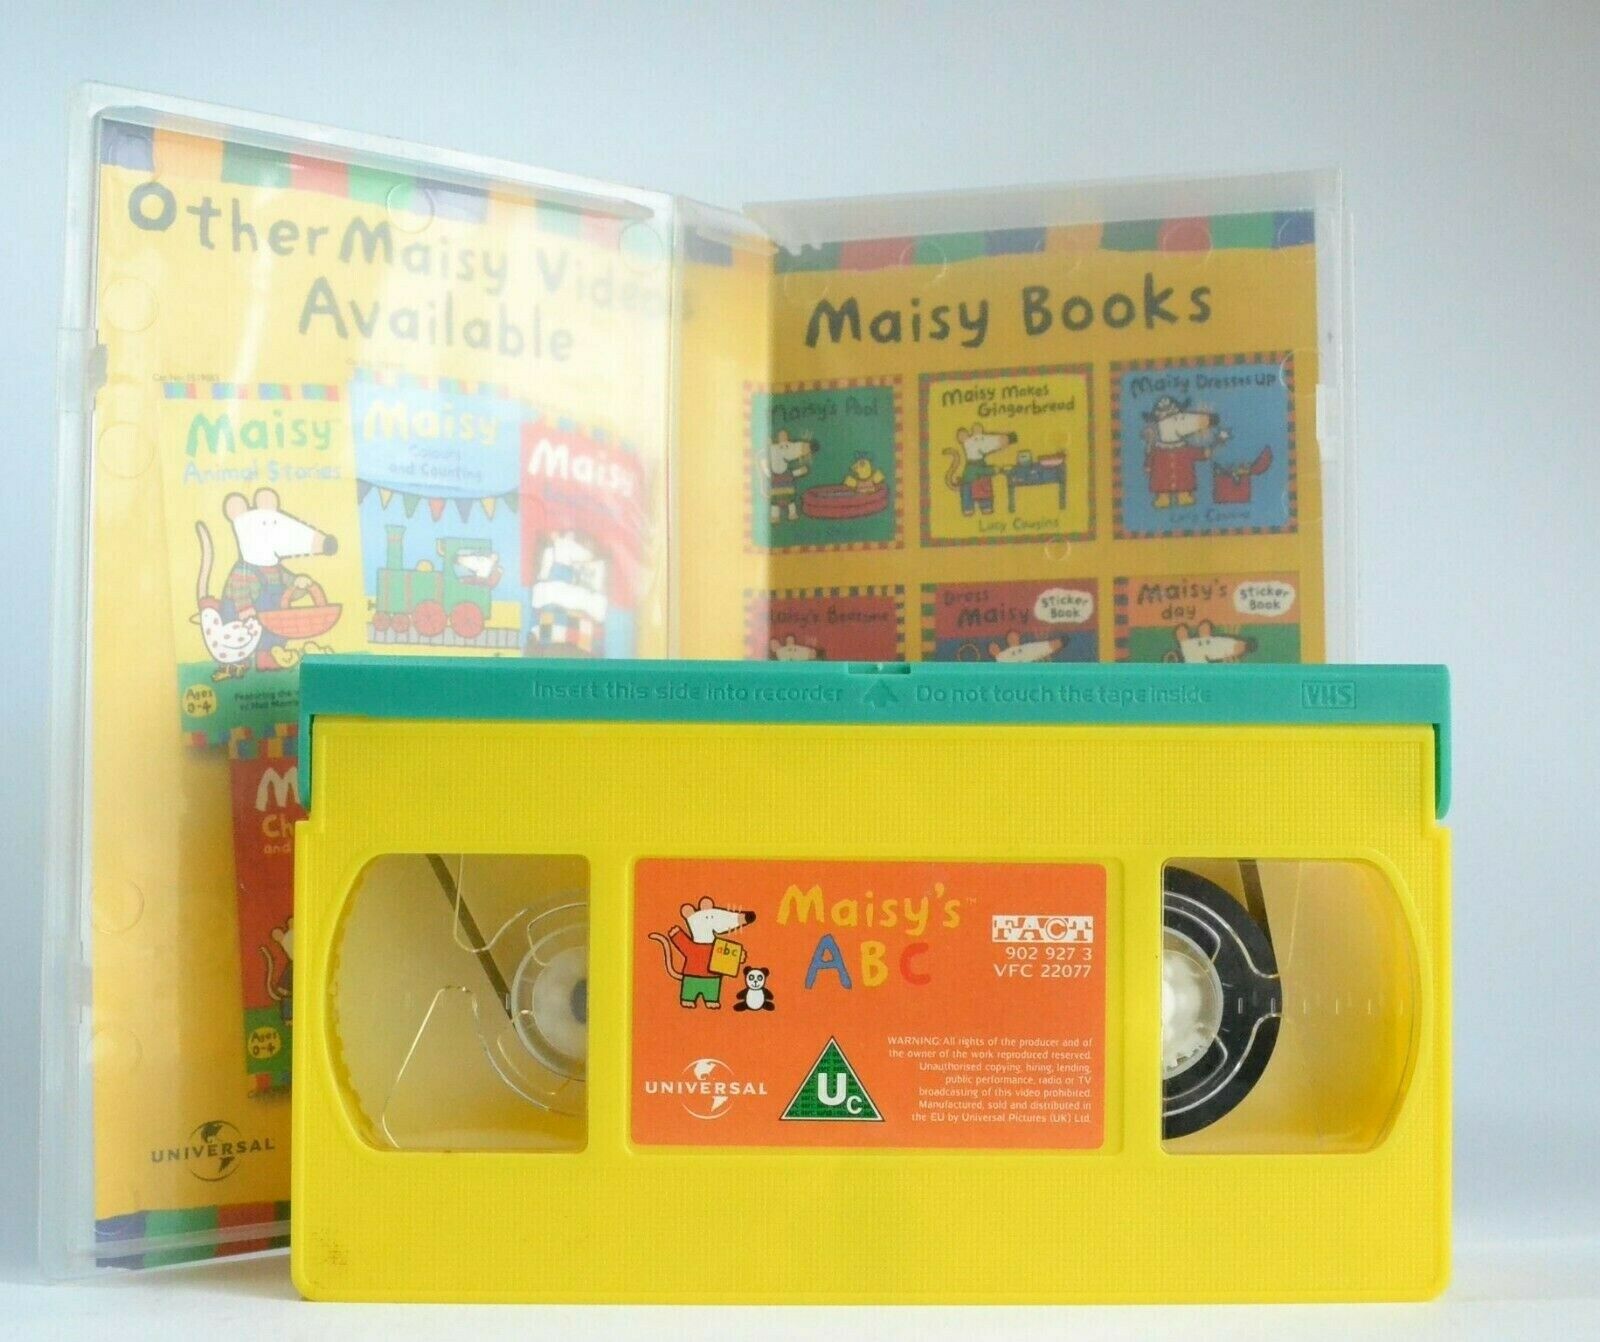 Maisy's ABC: By Lucy Cousins - Children's Animated Series - Educational - VHS-